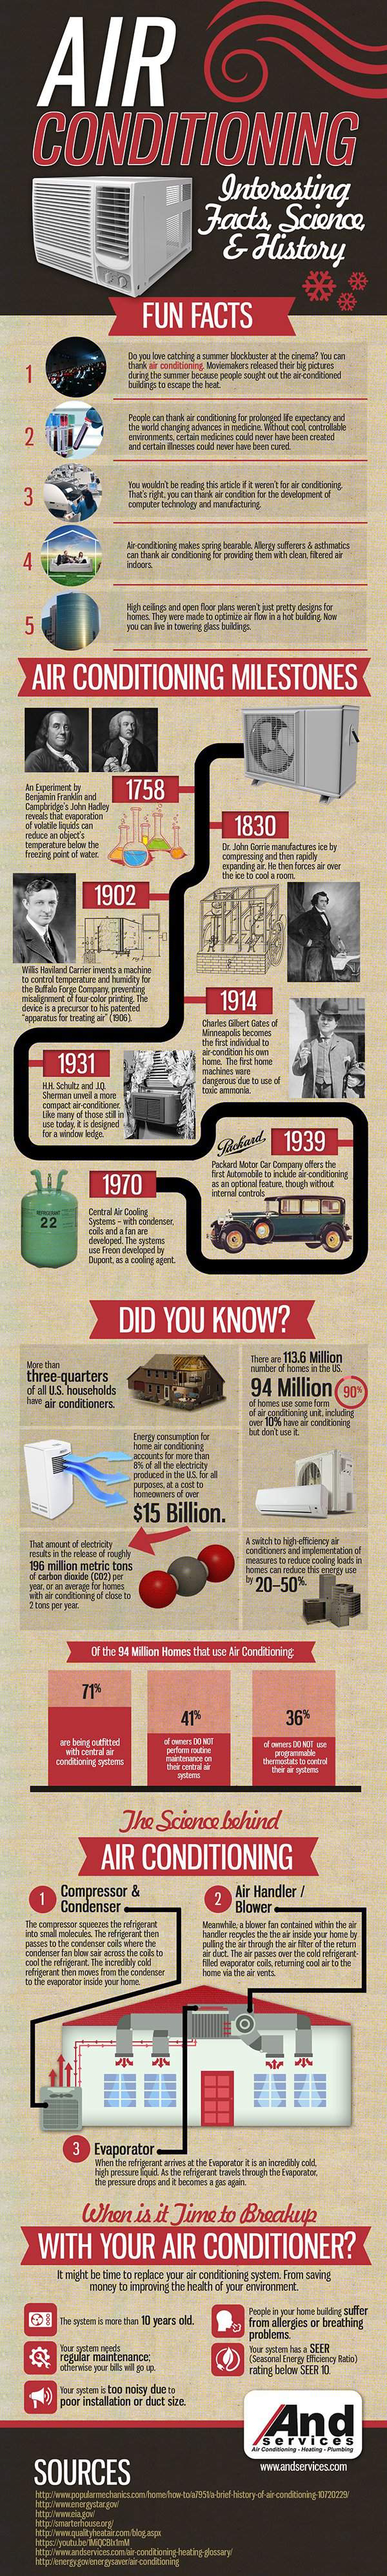 Air Conditioning Fun Facts